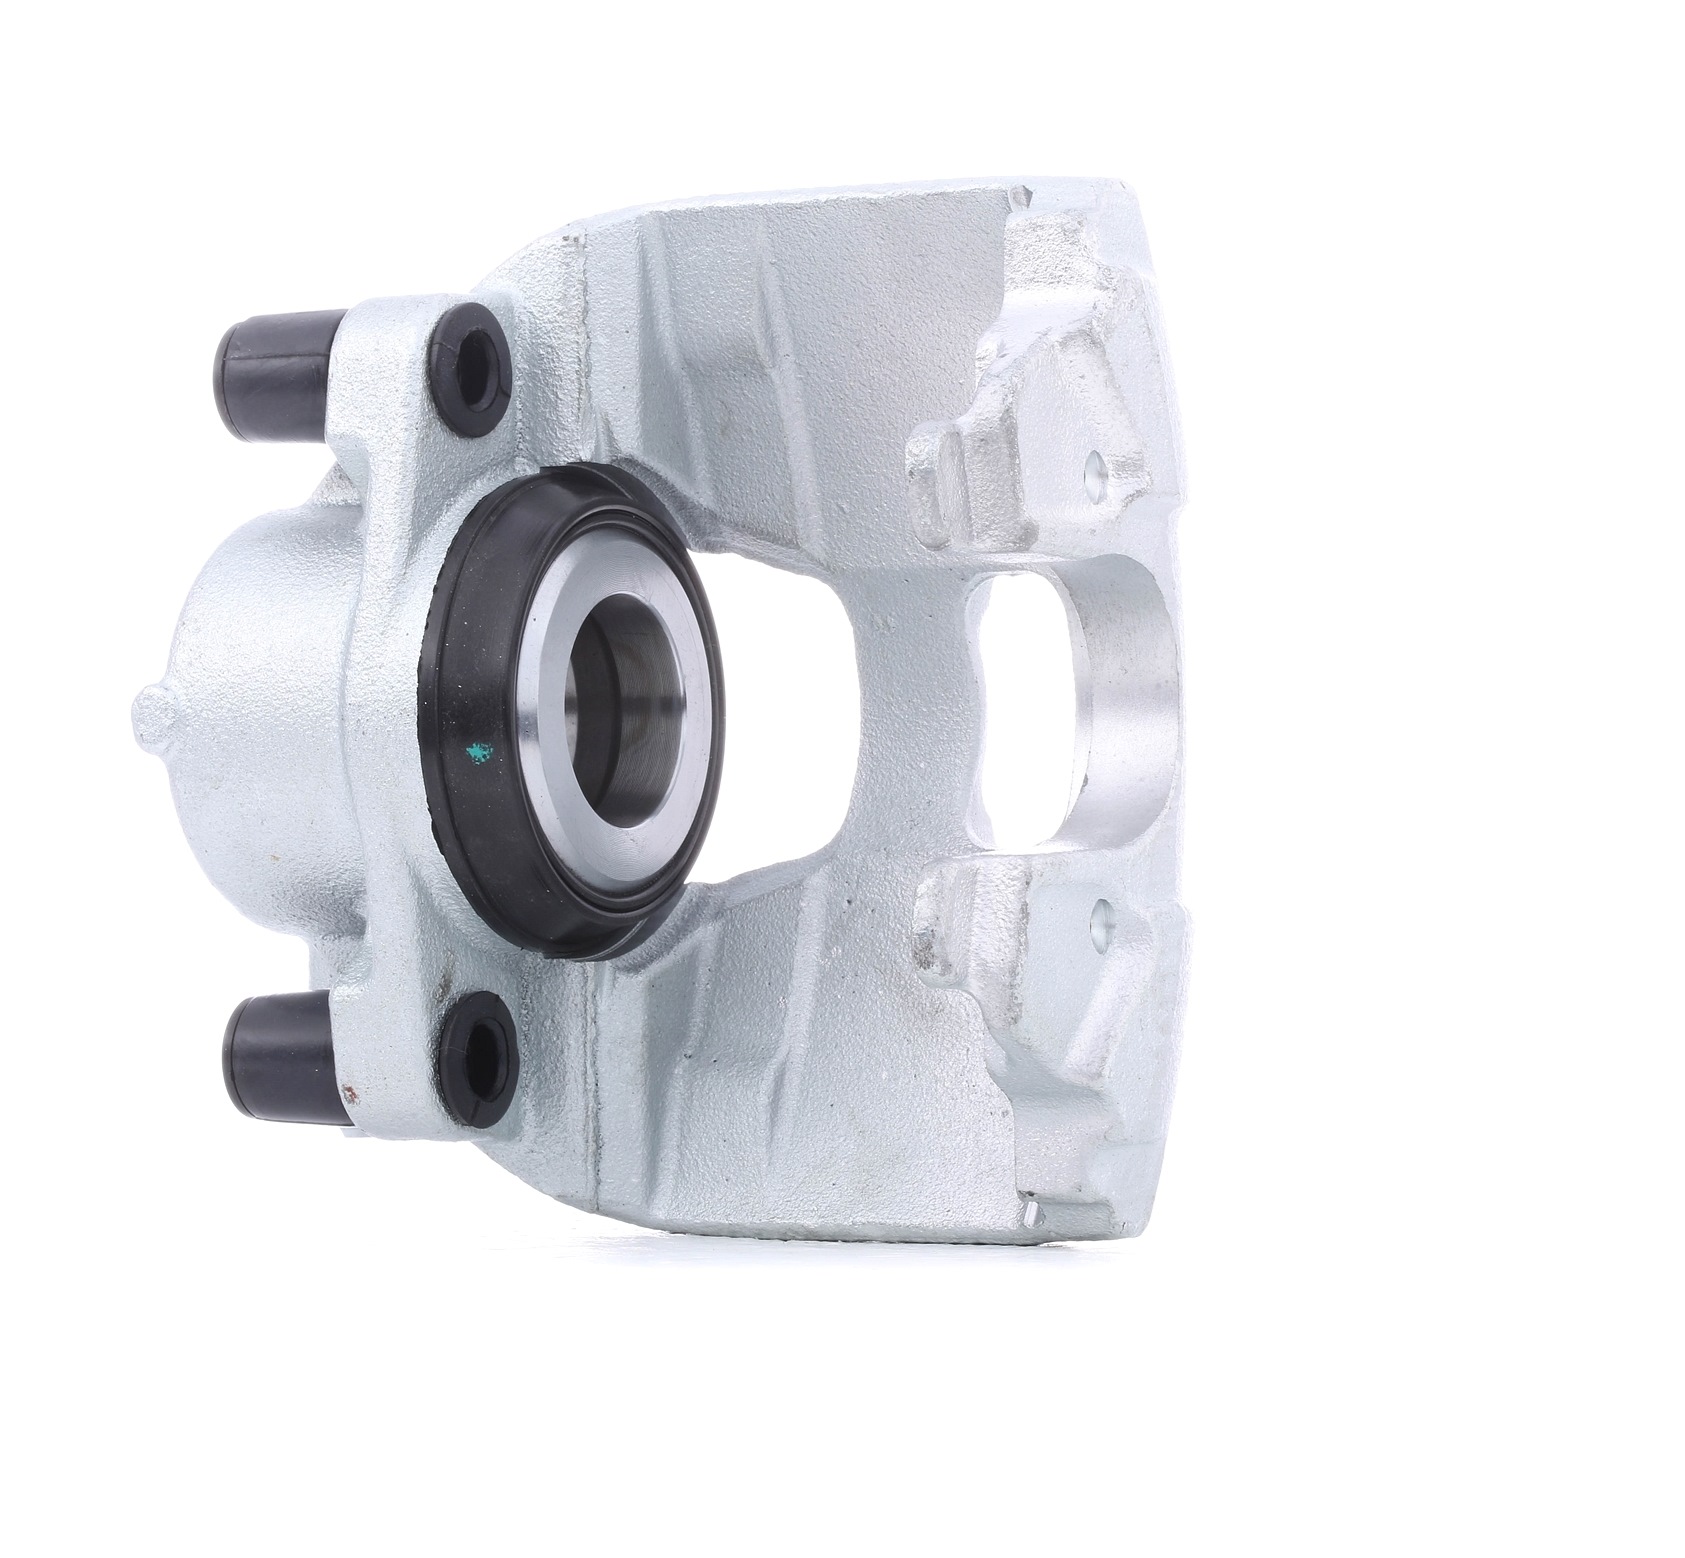 STARK SKBC-0460558 Brake caliper Cast Iron, 78mm, Front Axle Left, in front of axle, without holder